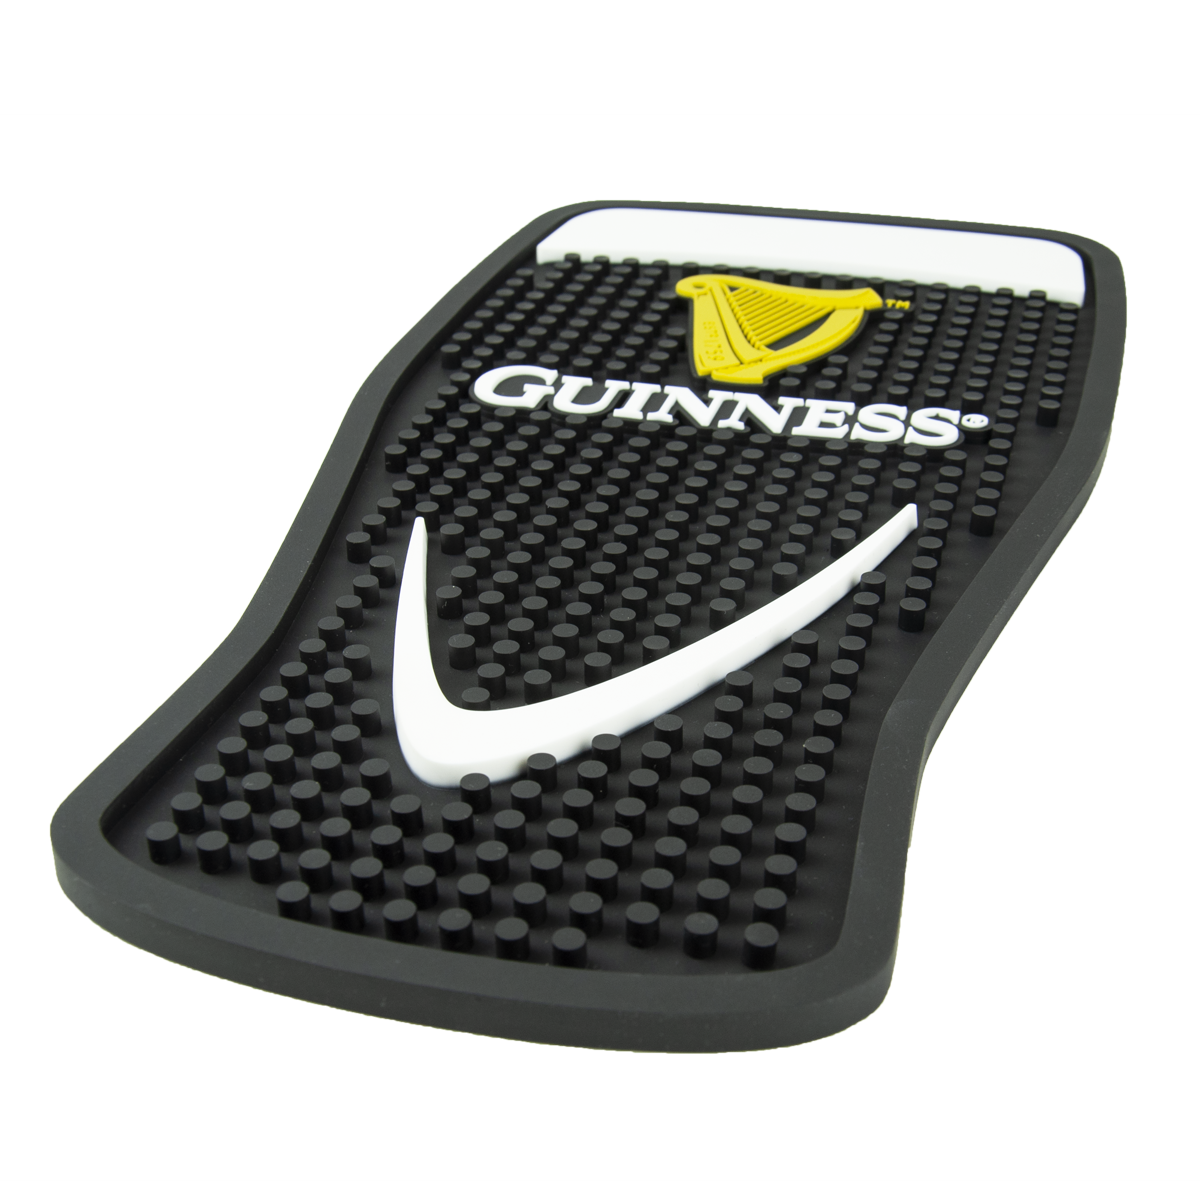 The Guinness PVC Pint shape Bar Mat is prominently displayed on a classic black bar mat.